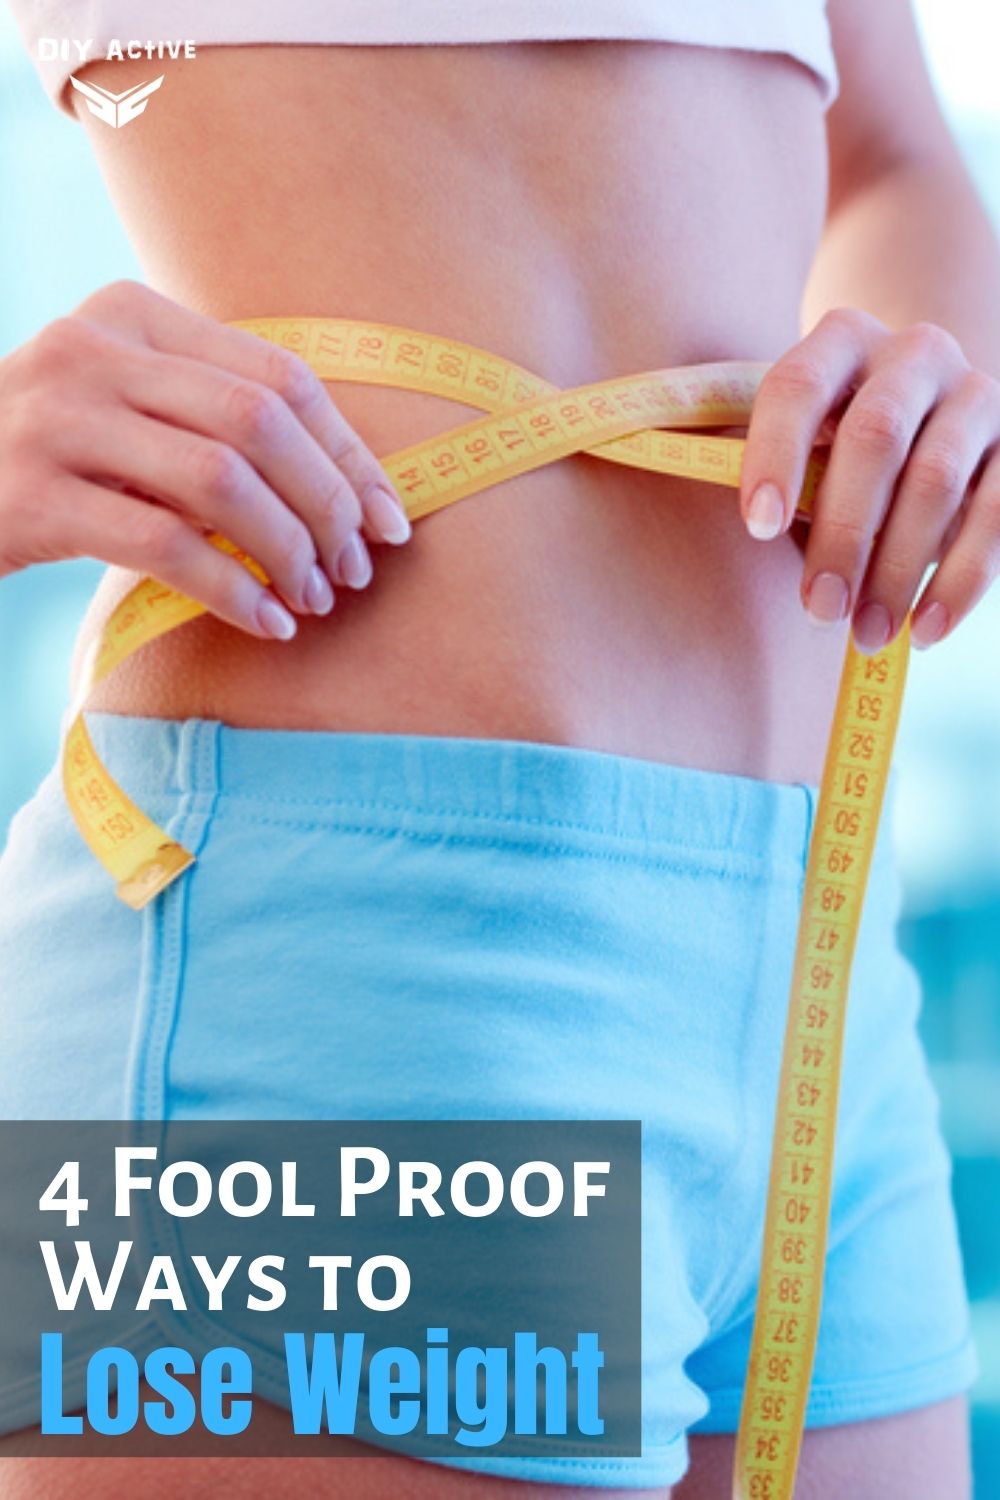 4 Steps for a Fool Proof Way to Lose Weight